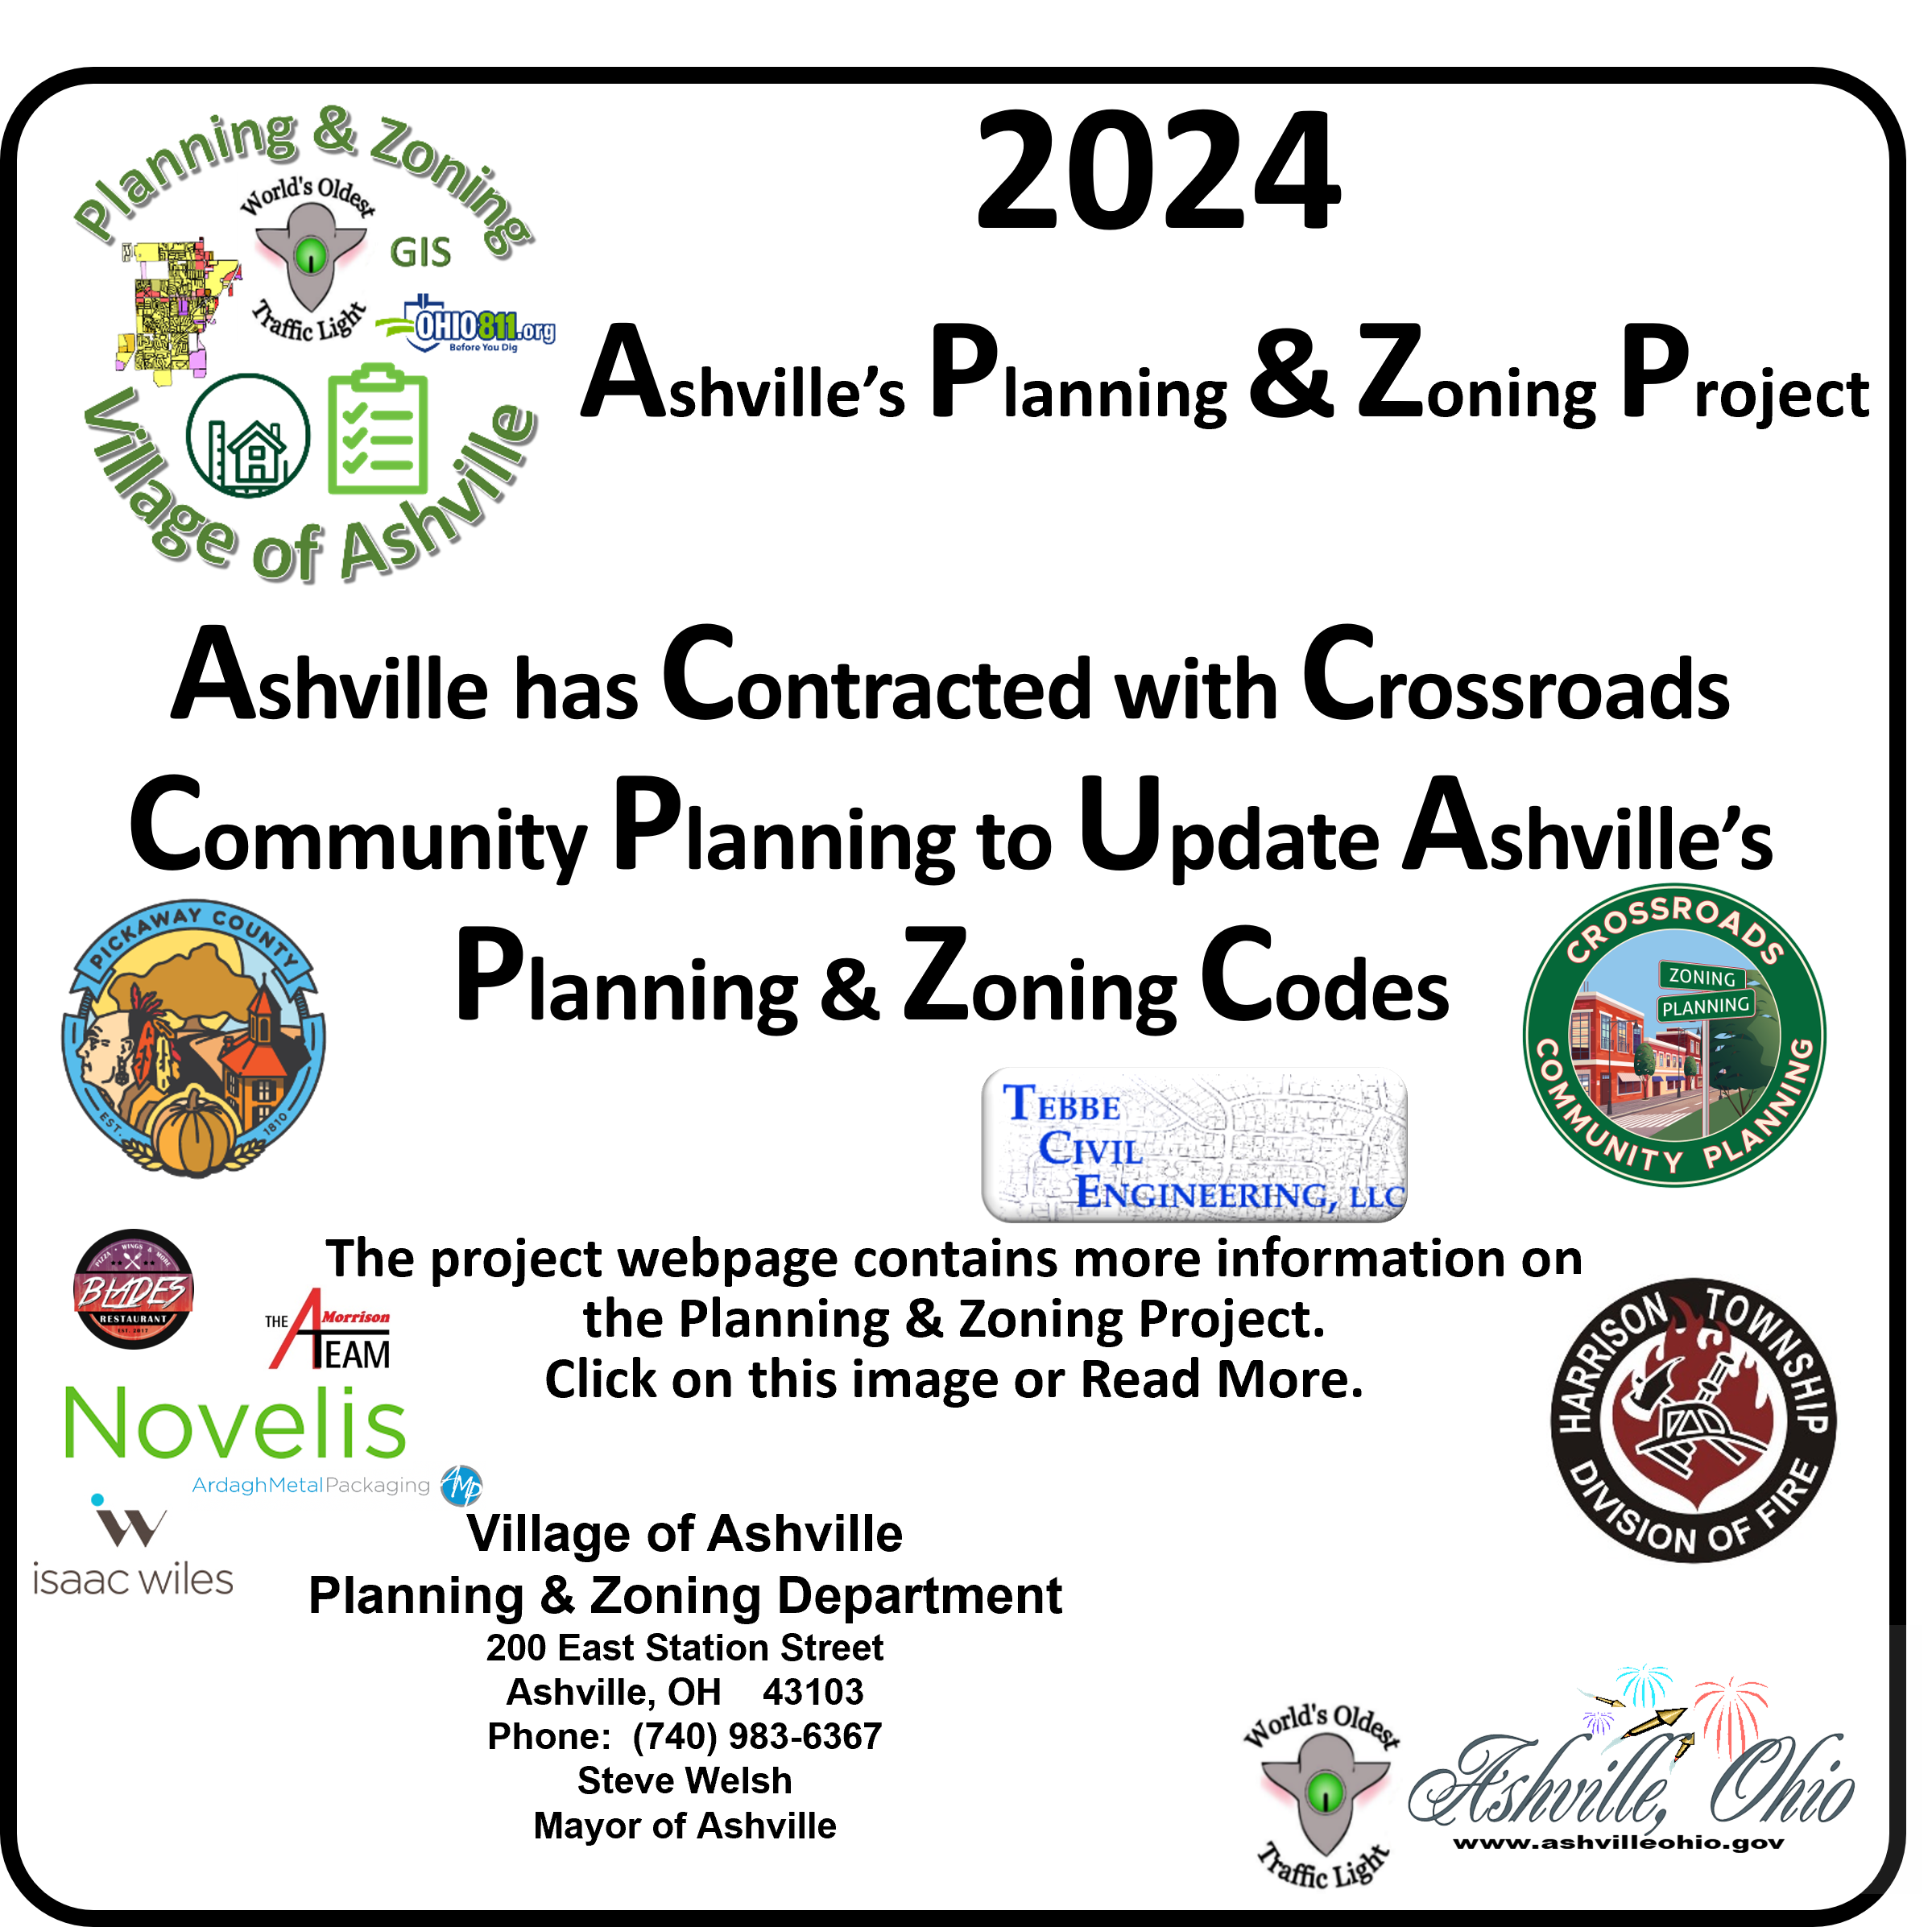 Planning & Zoning Project